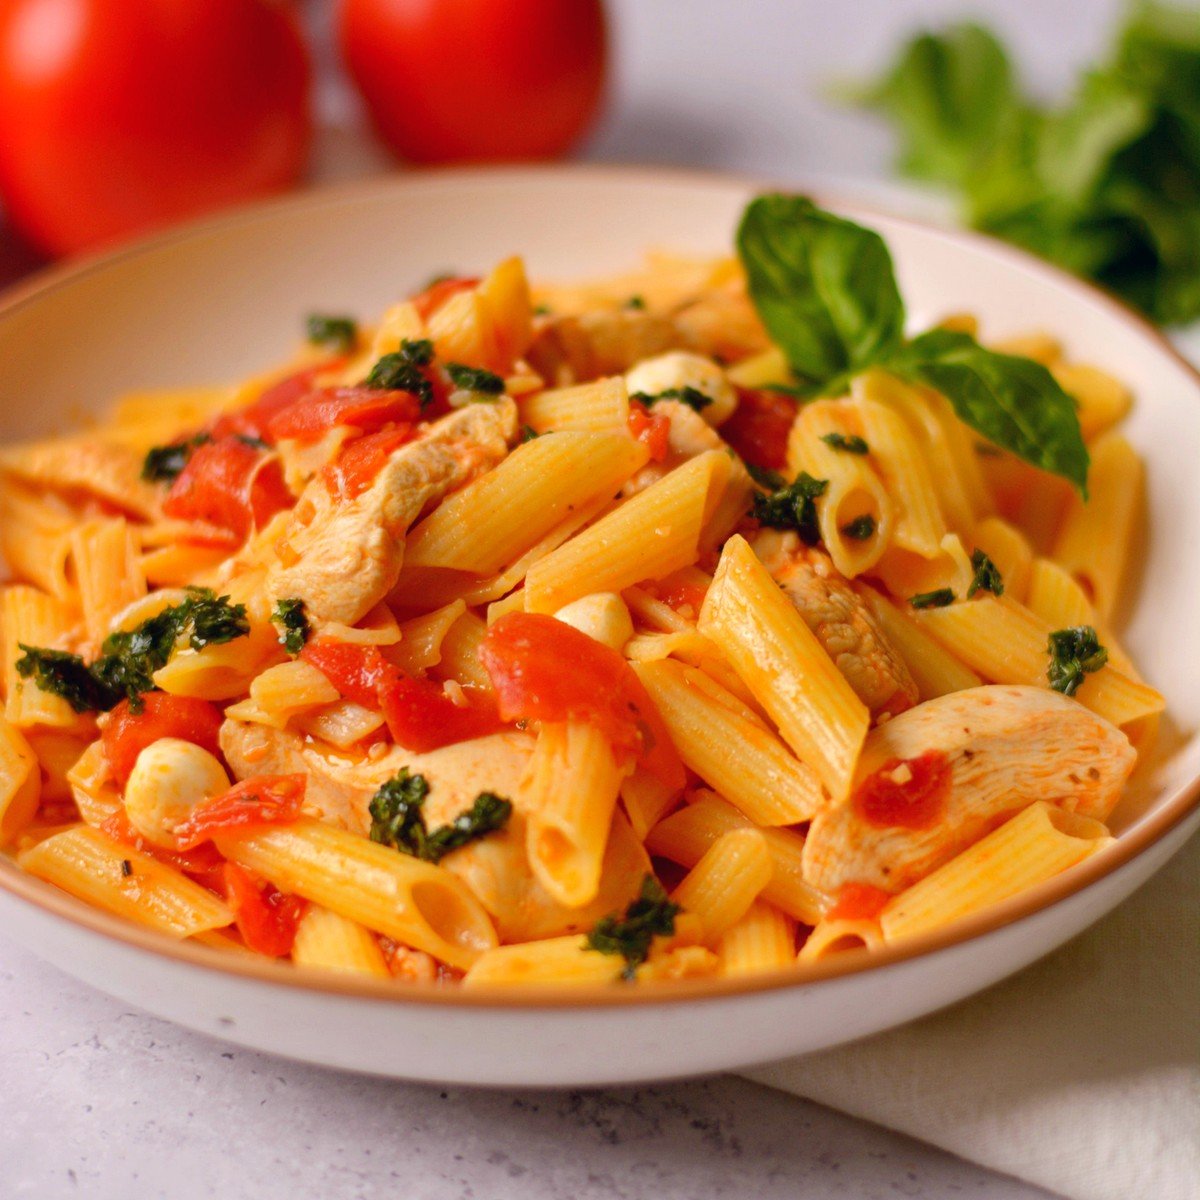 Penne pasta, tomatoes, and basil in a white bowl.